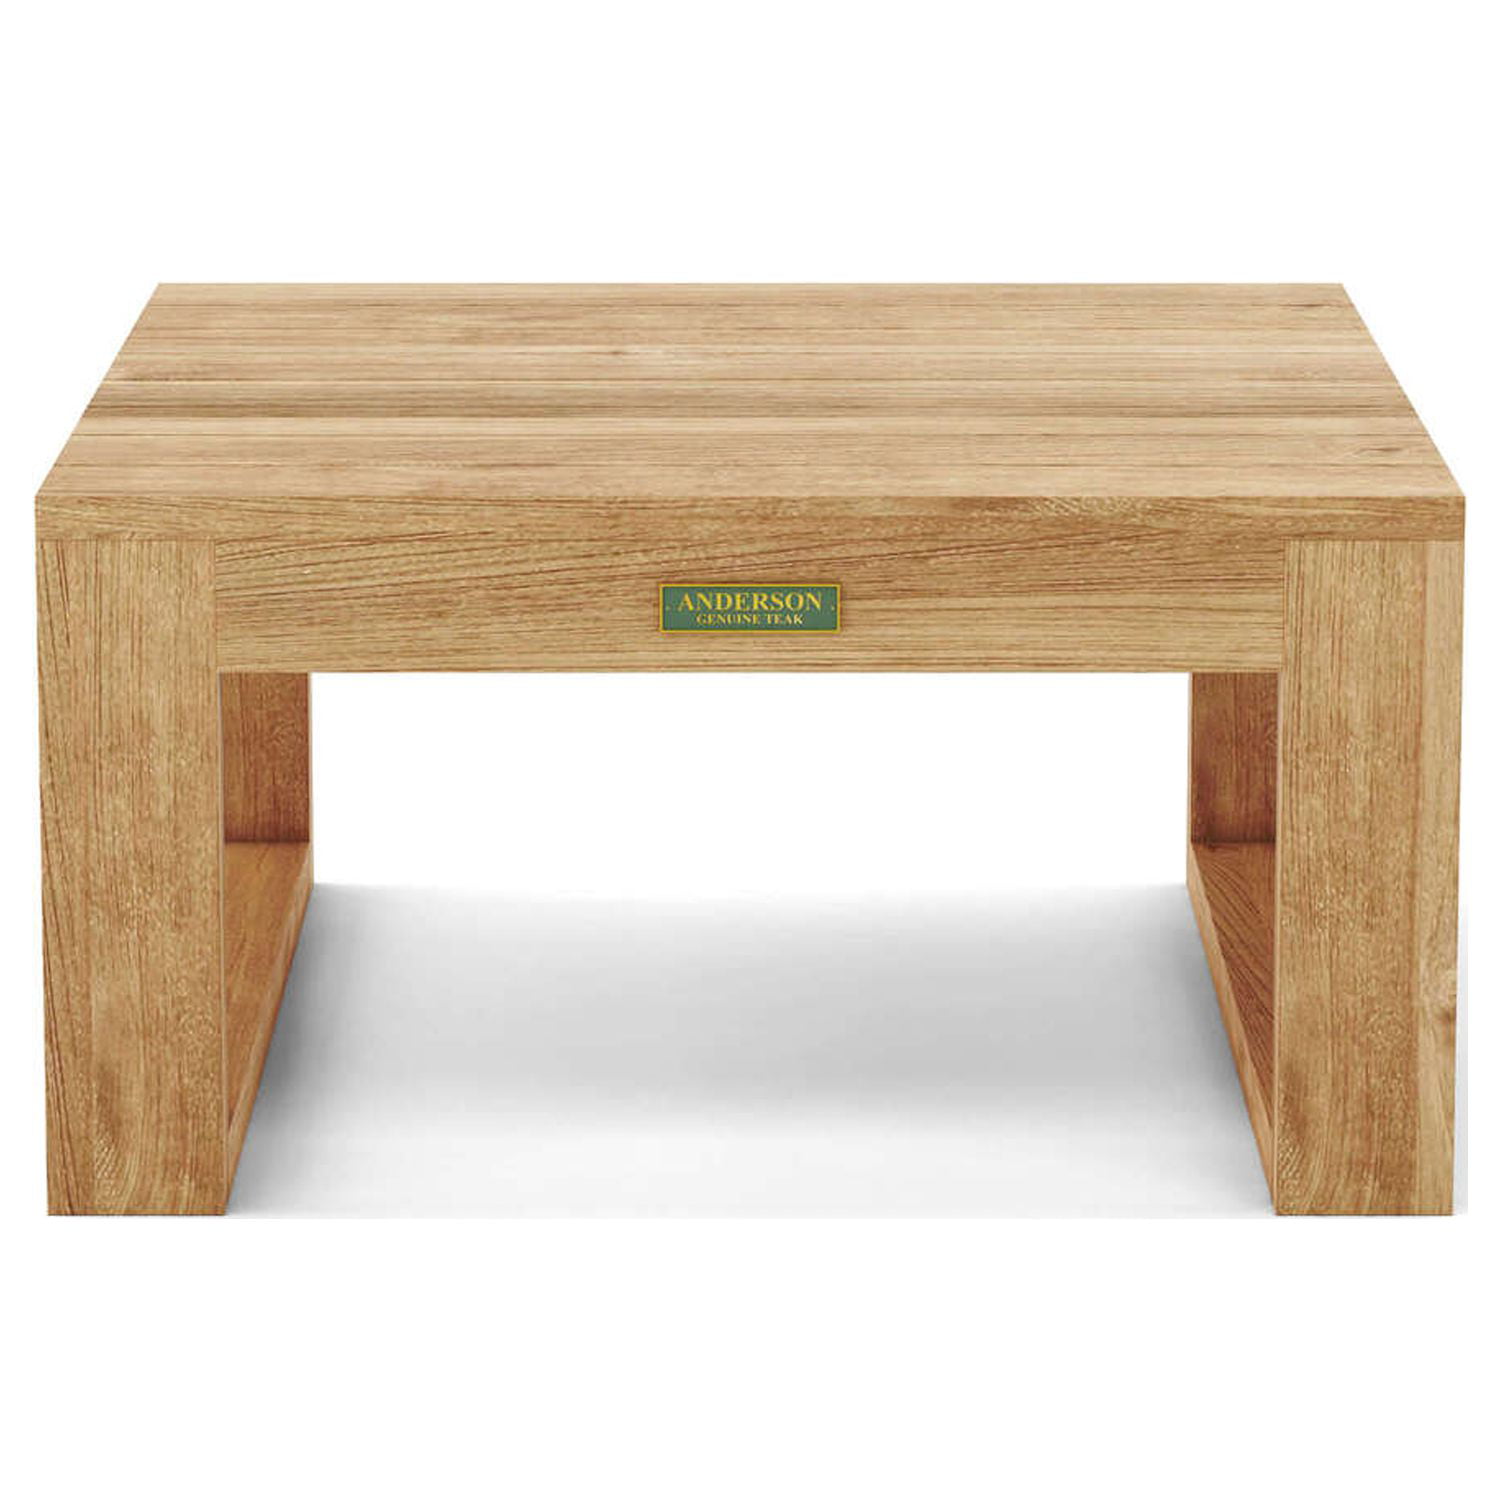 Picture of Anderson Teak TB-808S Straight Side Table, Natural Smooth Well Sanded